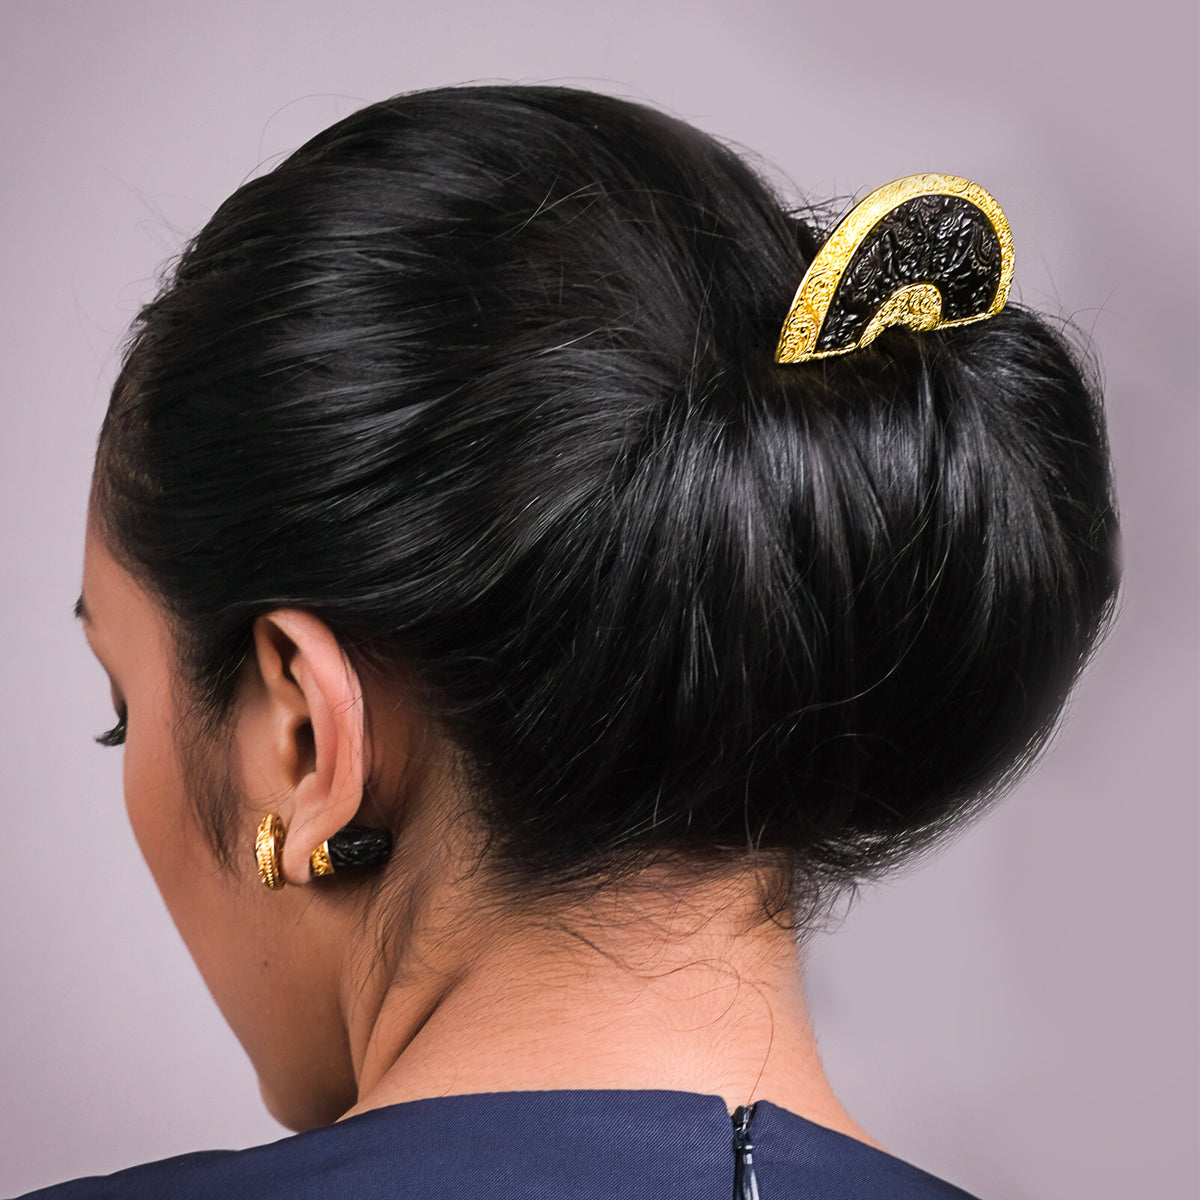 Gajah Collection Balinese Hairpiece 24k Gold Over Sterling Silver